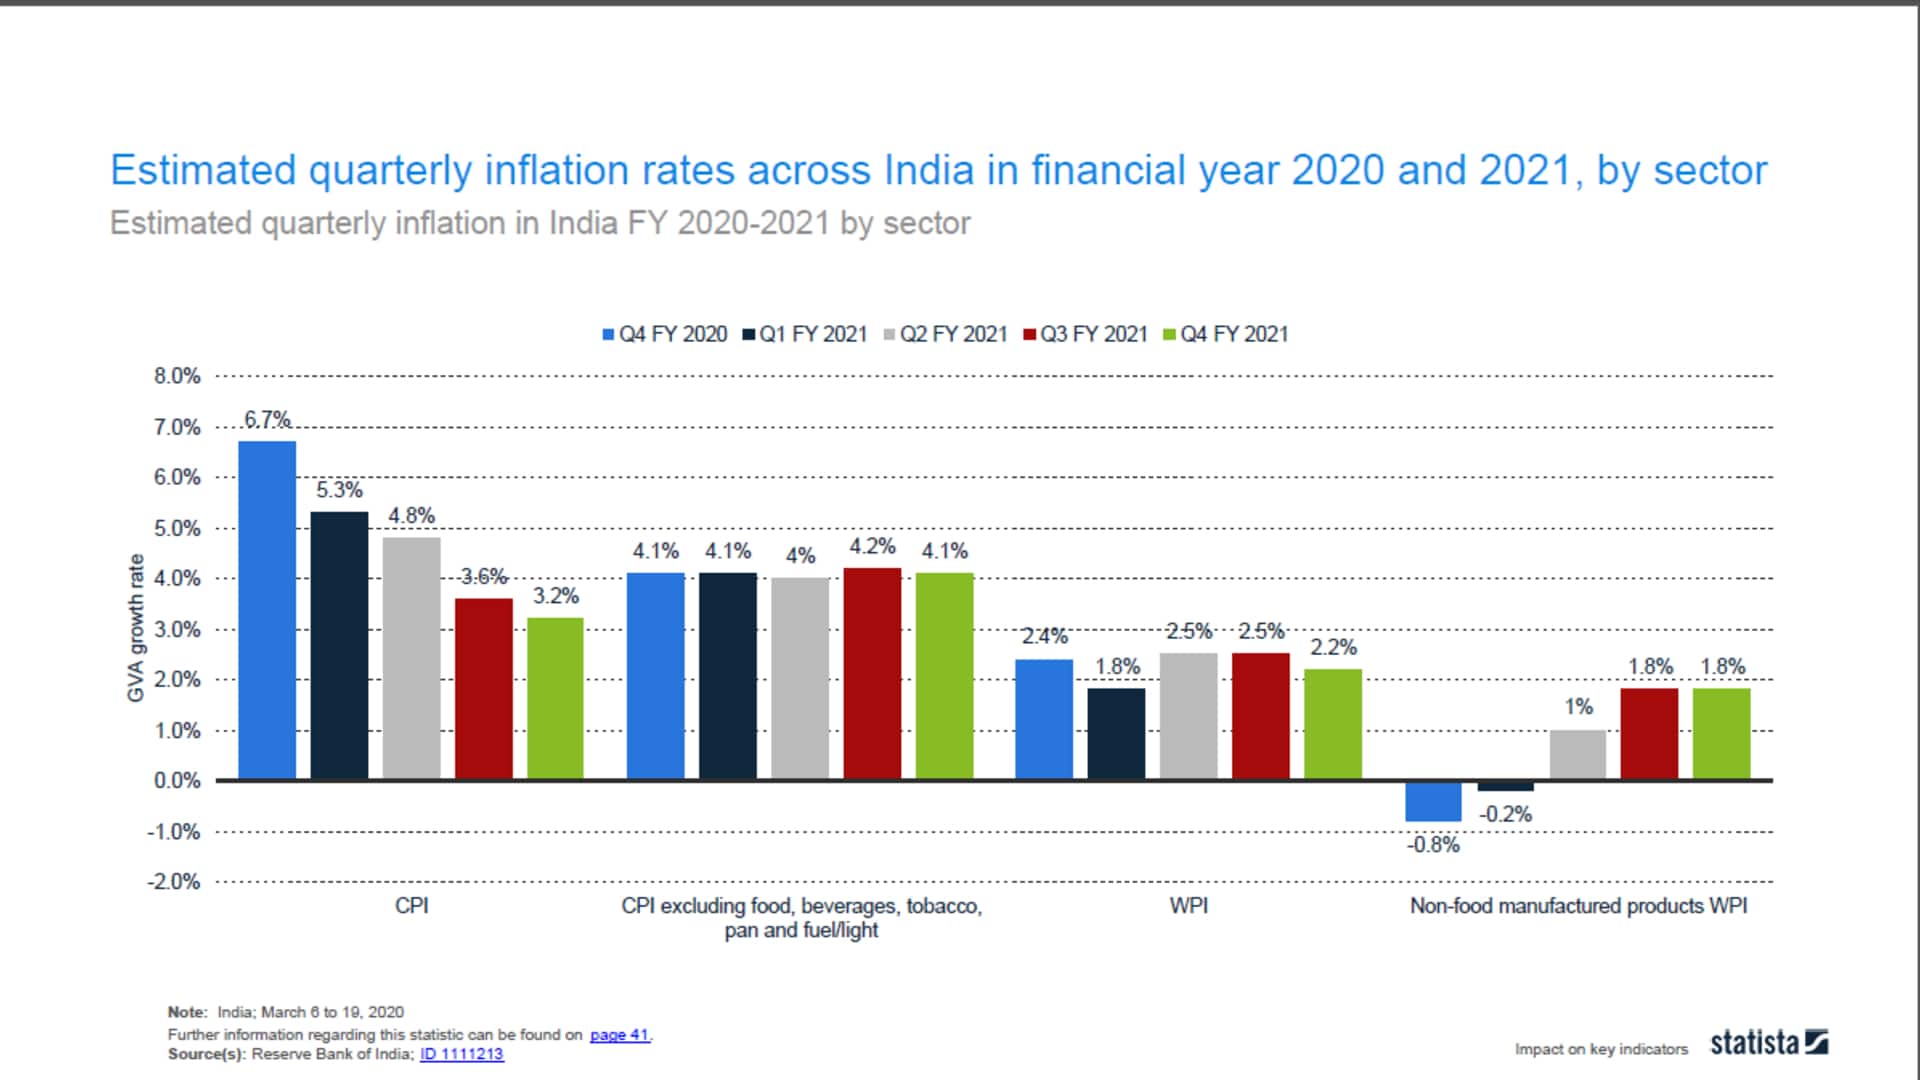 https://images.moneycontrol.com/static-mcnews/2020/05/5.-Estimated-quarterly-inflation-rates-across-India-in-financial-year-2020-and-2021-by-sector.jpg